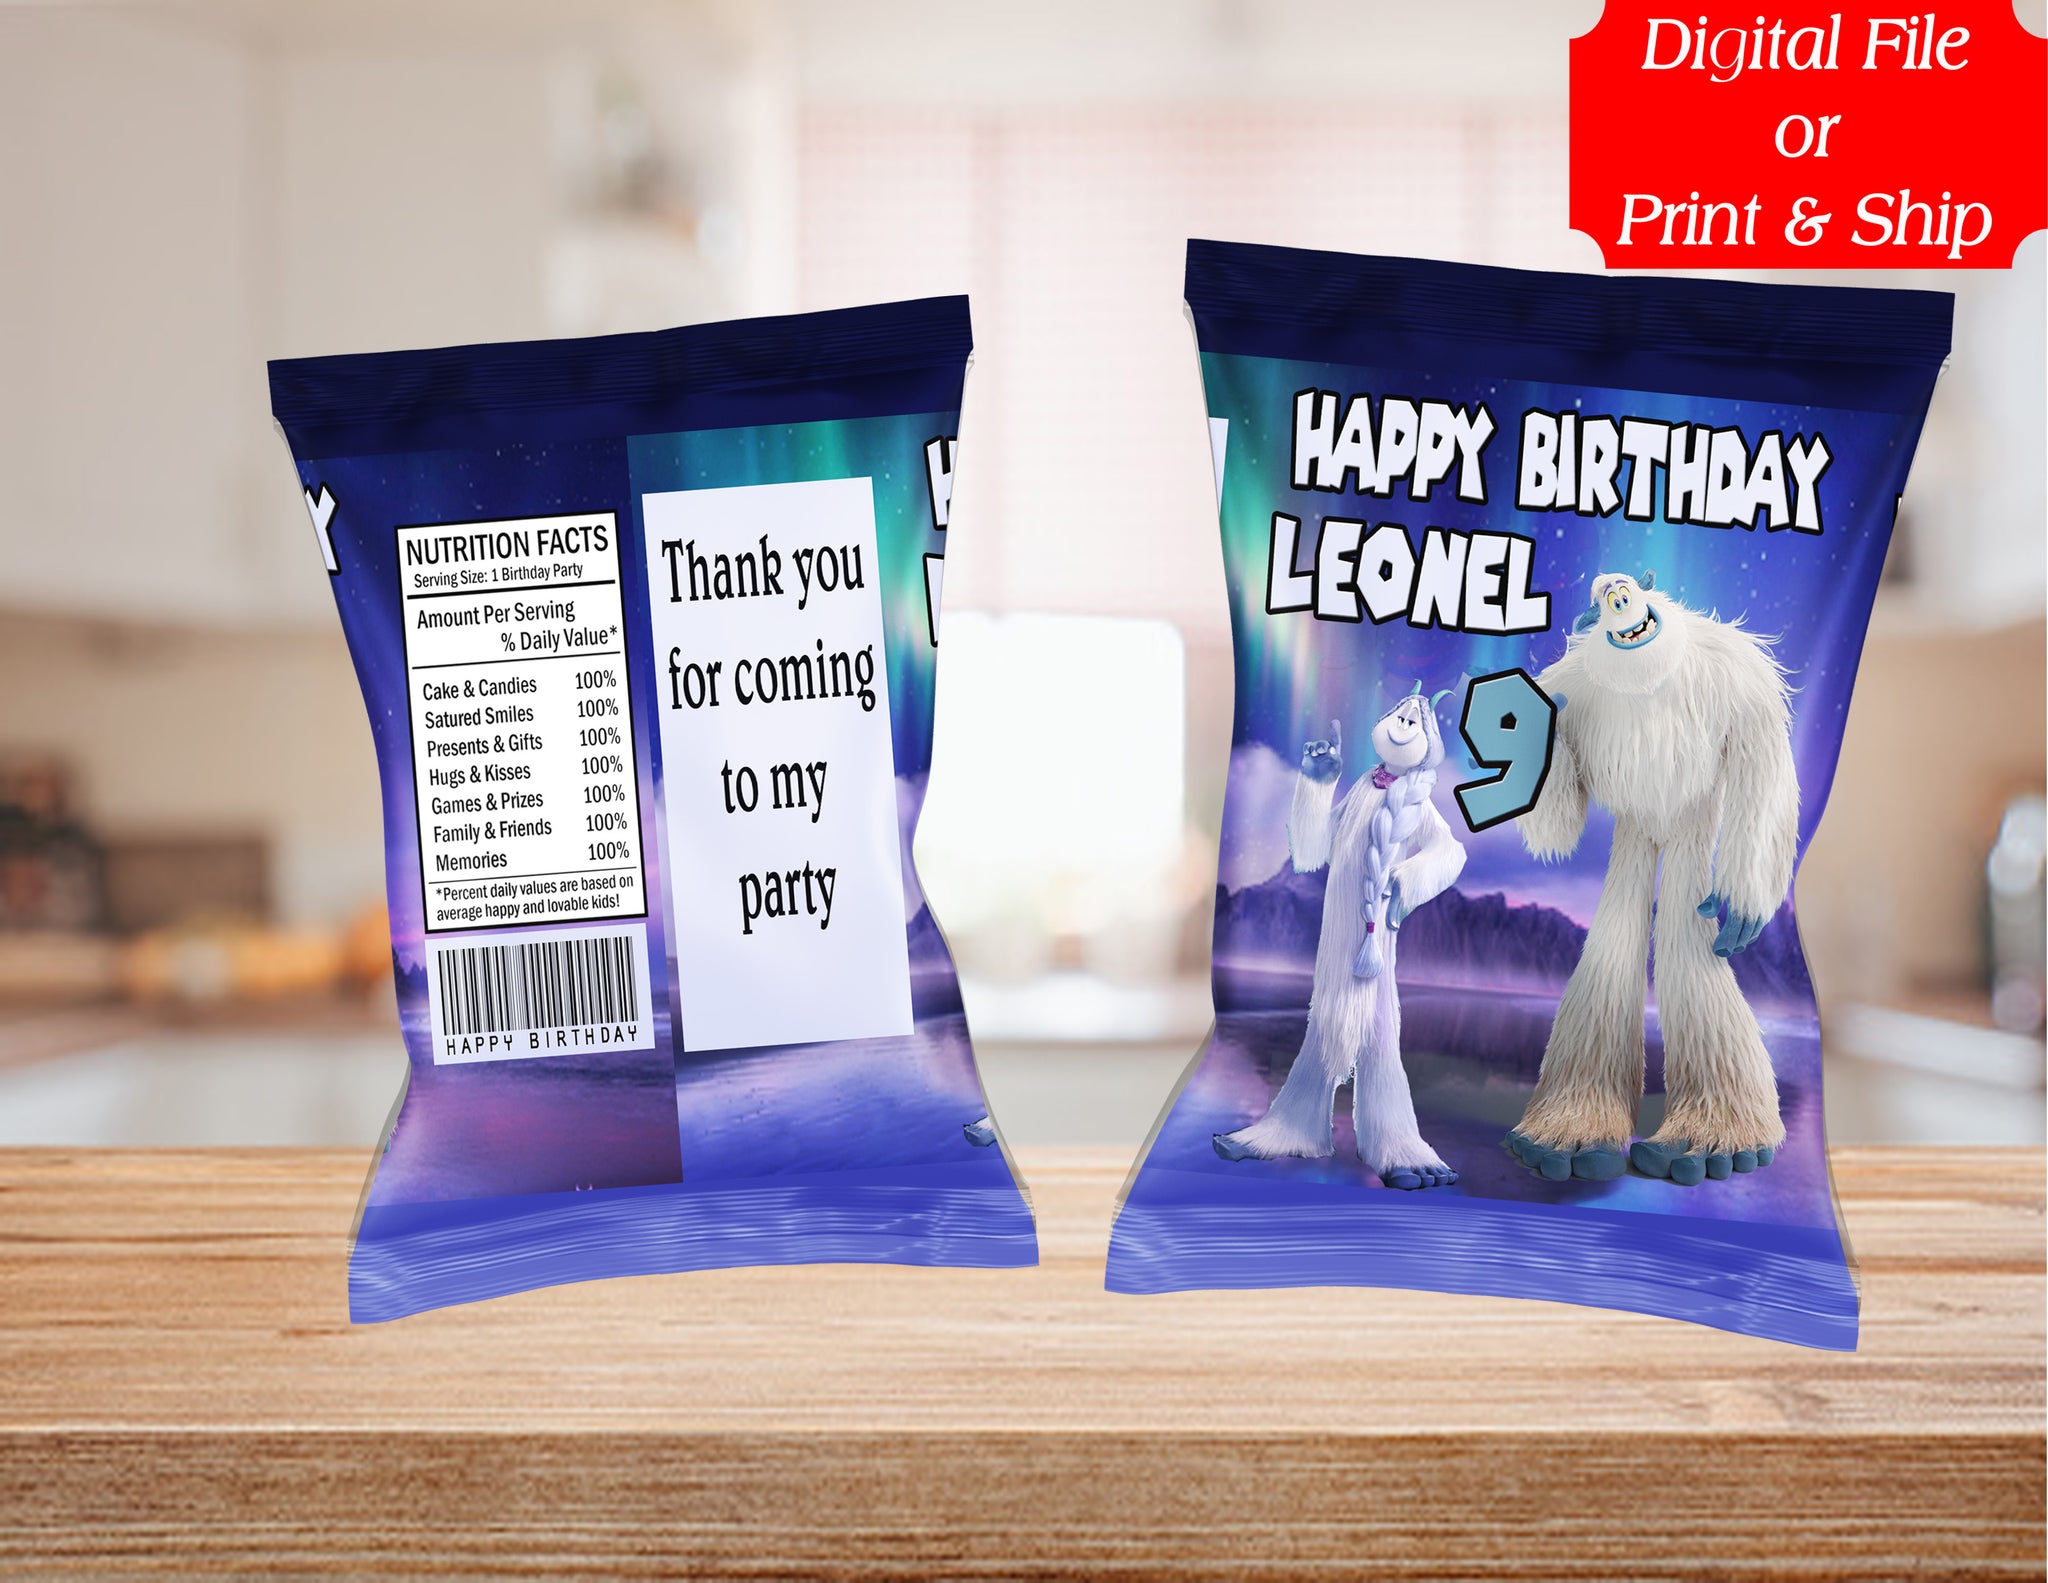 (12) Personalized SMALLFOOT Chip Candy Treat Bags Party Favors Printed or D. File